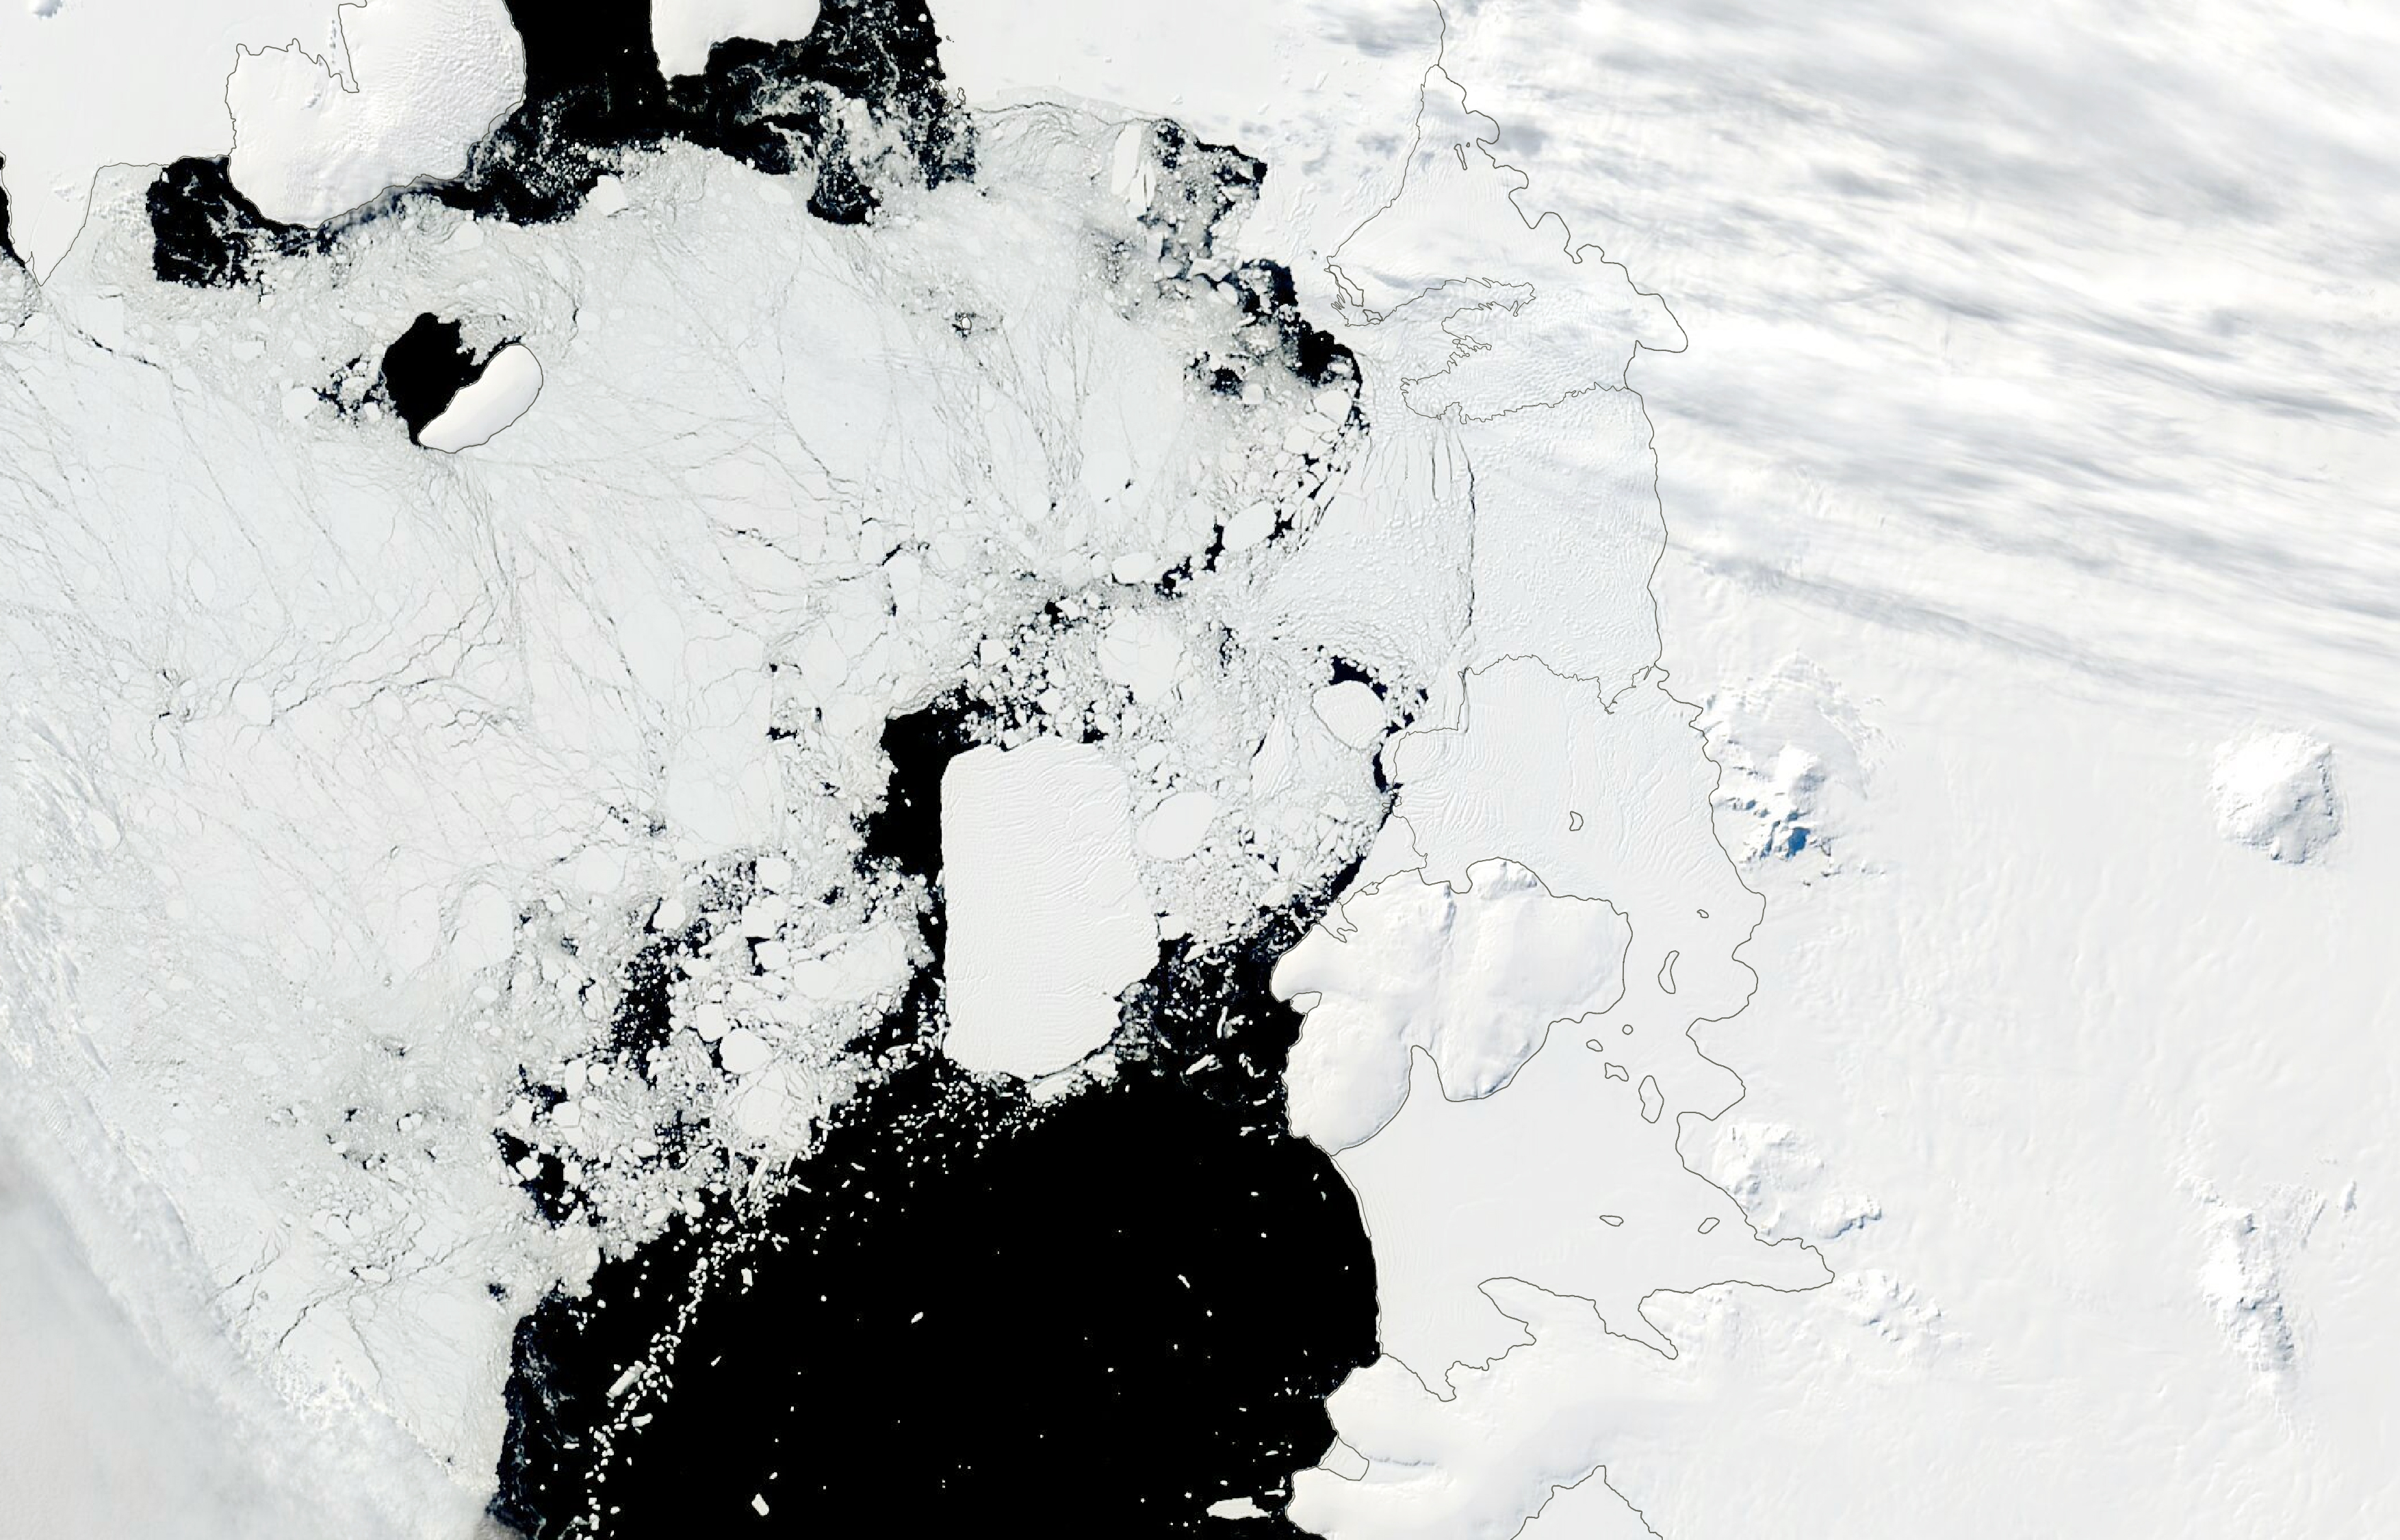 Antarctic Berg Grounded for Decades - related image preview